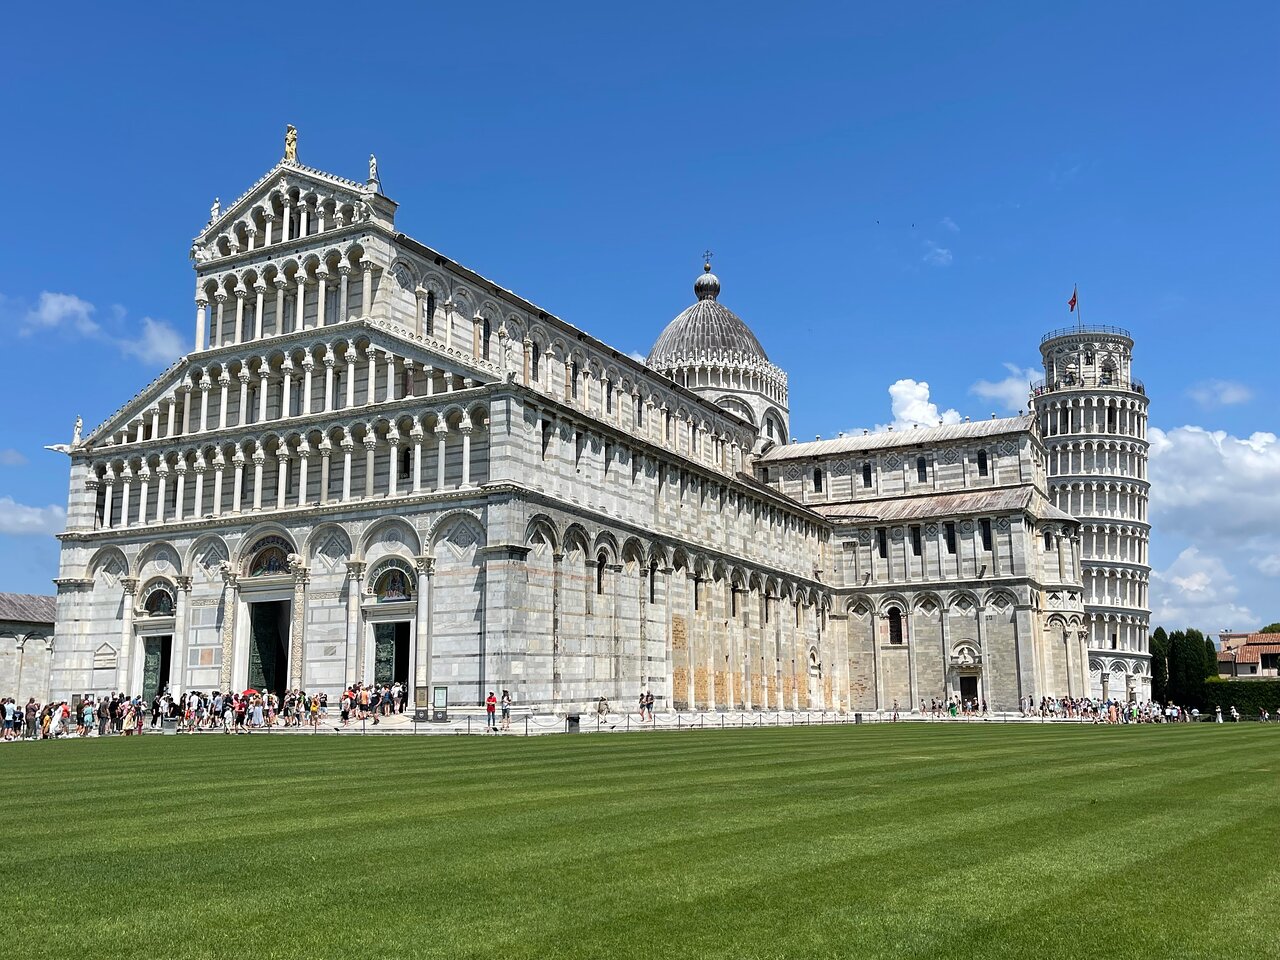 The cathedral of Pisa